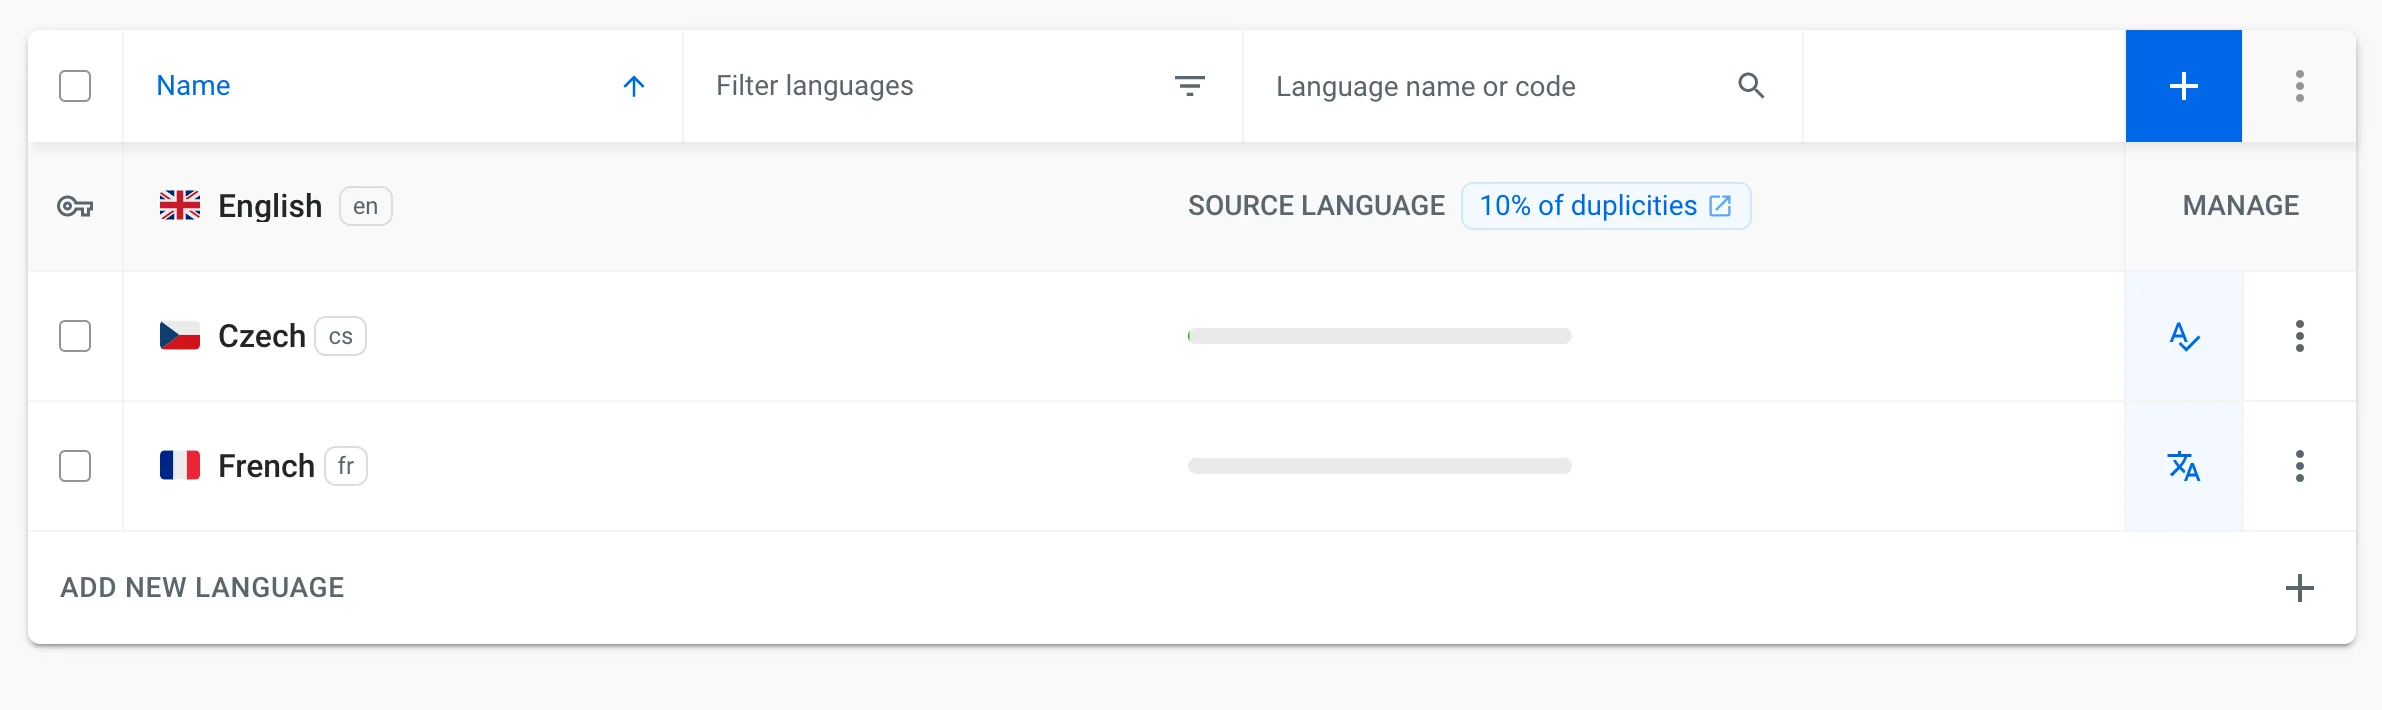 Localazy Duplicity Linking - Languages table